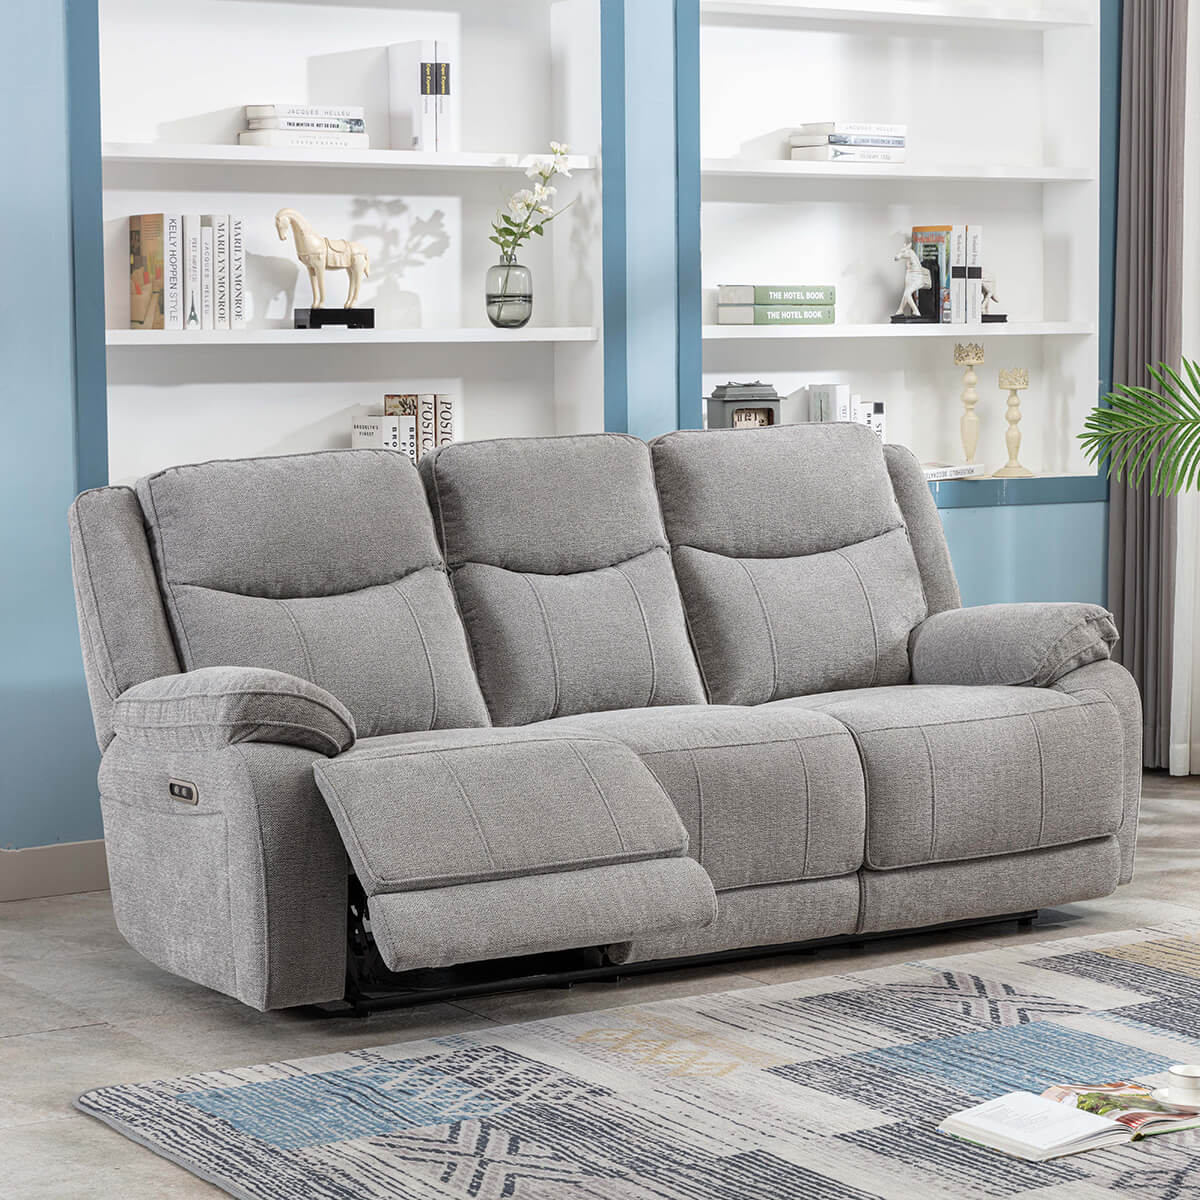 Herbert 3 Seater Electric Recliner - Light Grey Fabric - Get Furnished